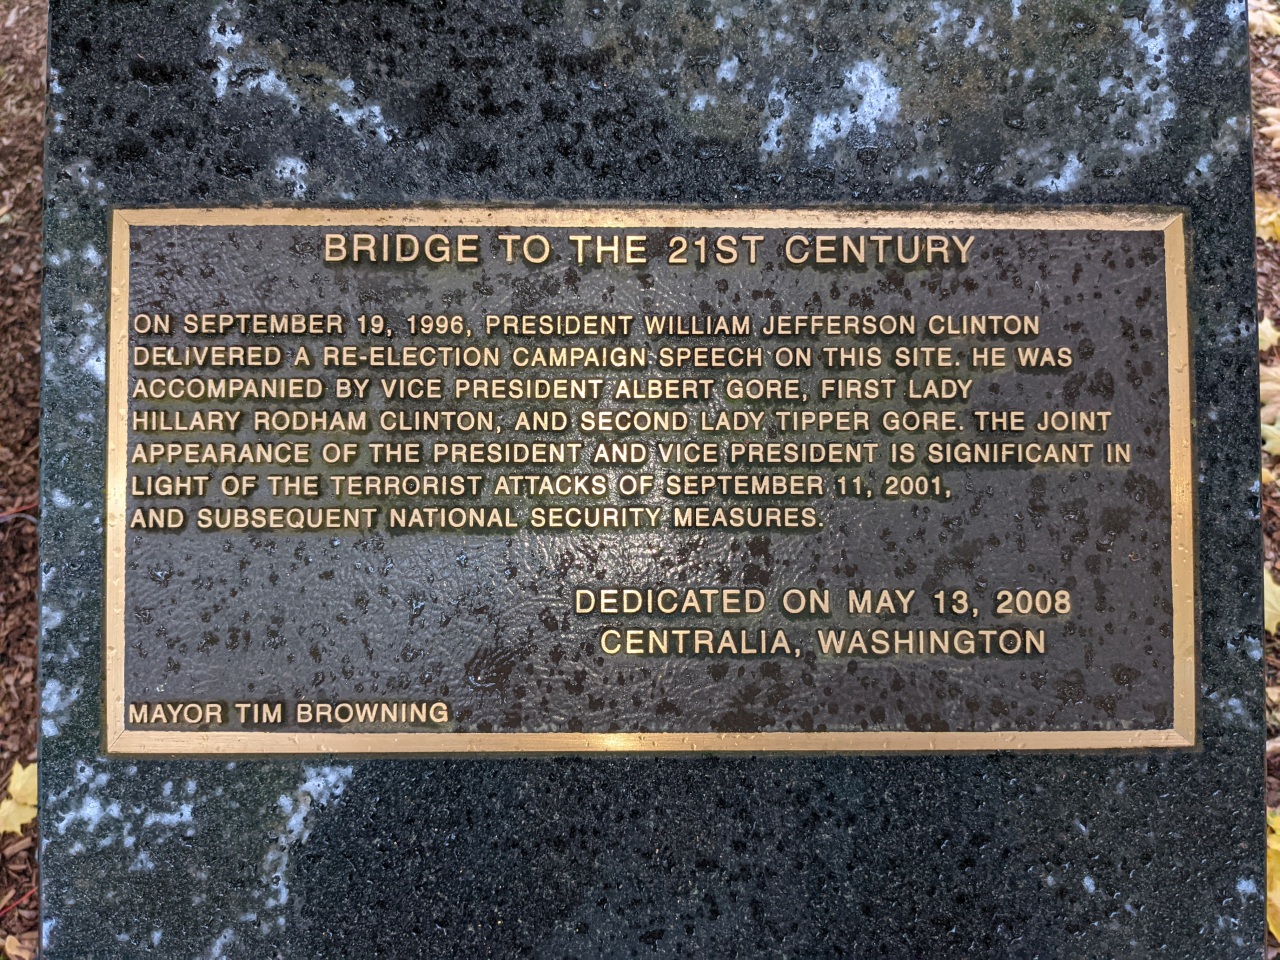 I absolutely do not understand why this plaque was put here in 2008.